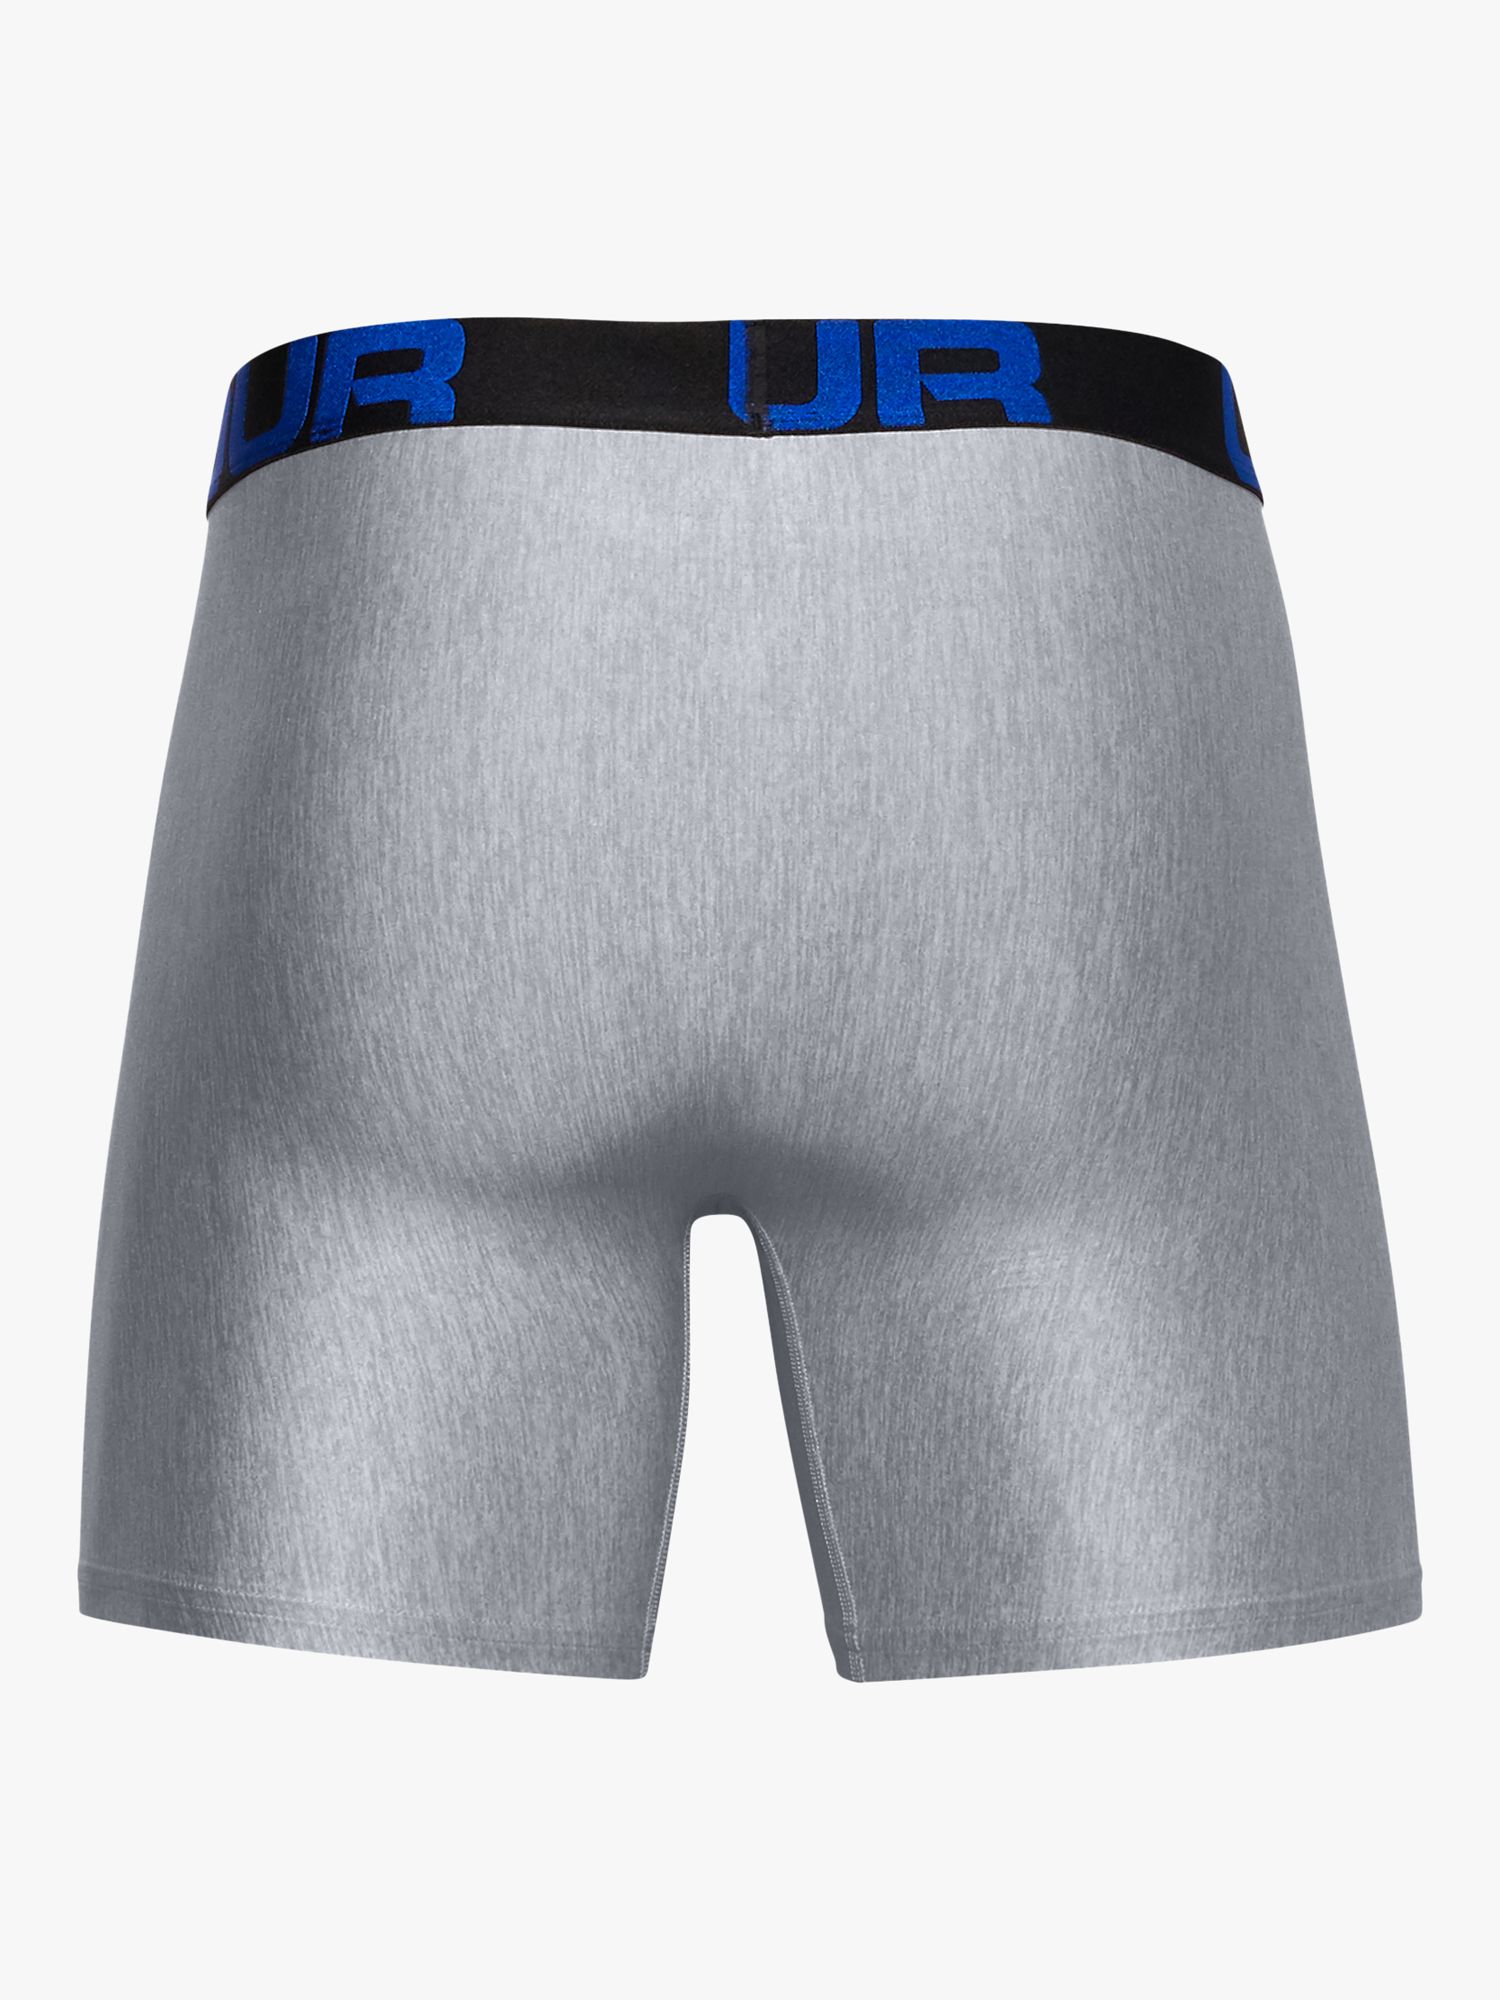 Under Armour Men's Tech 3 in 2 Pack BOXERS, Grey (Mod Gray Light